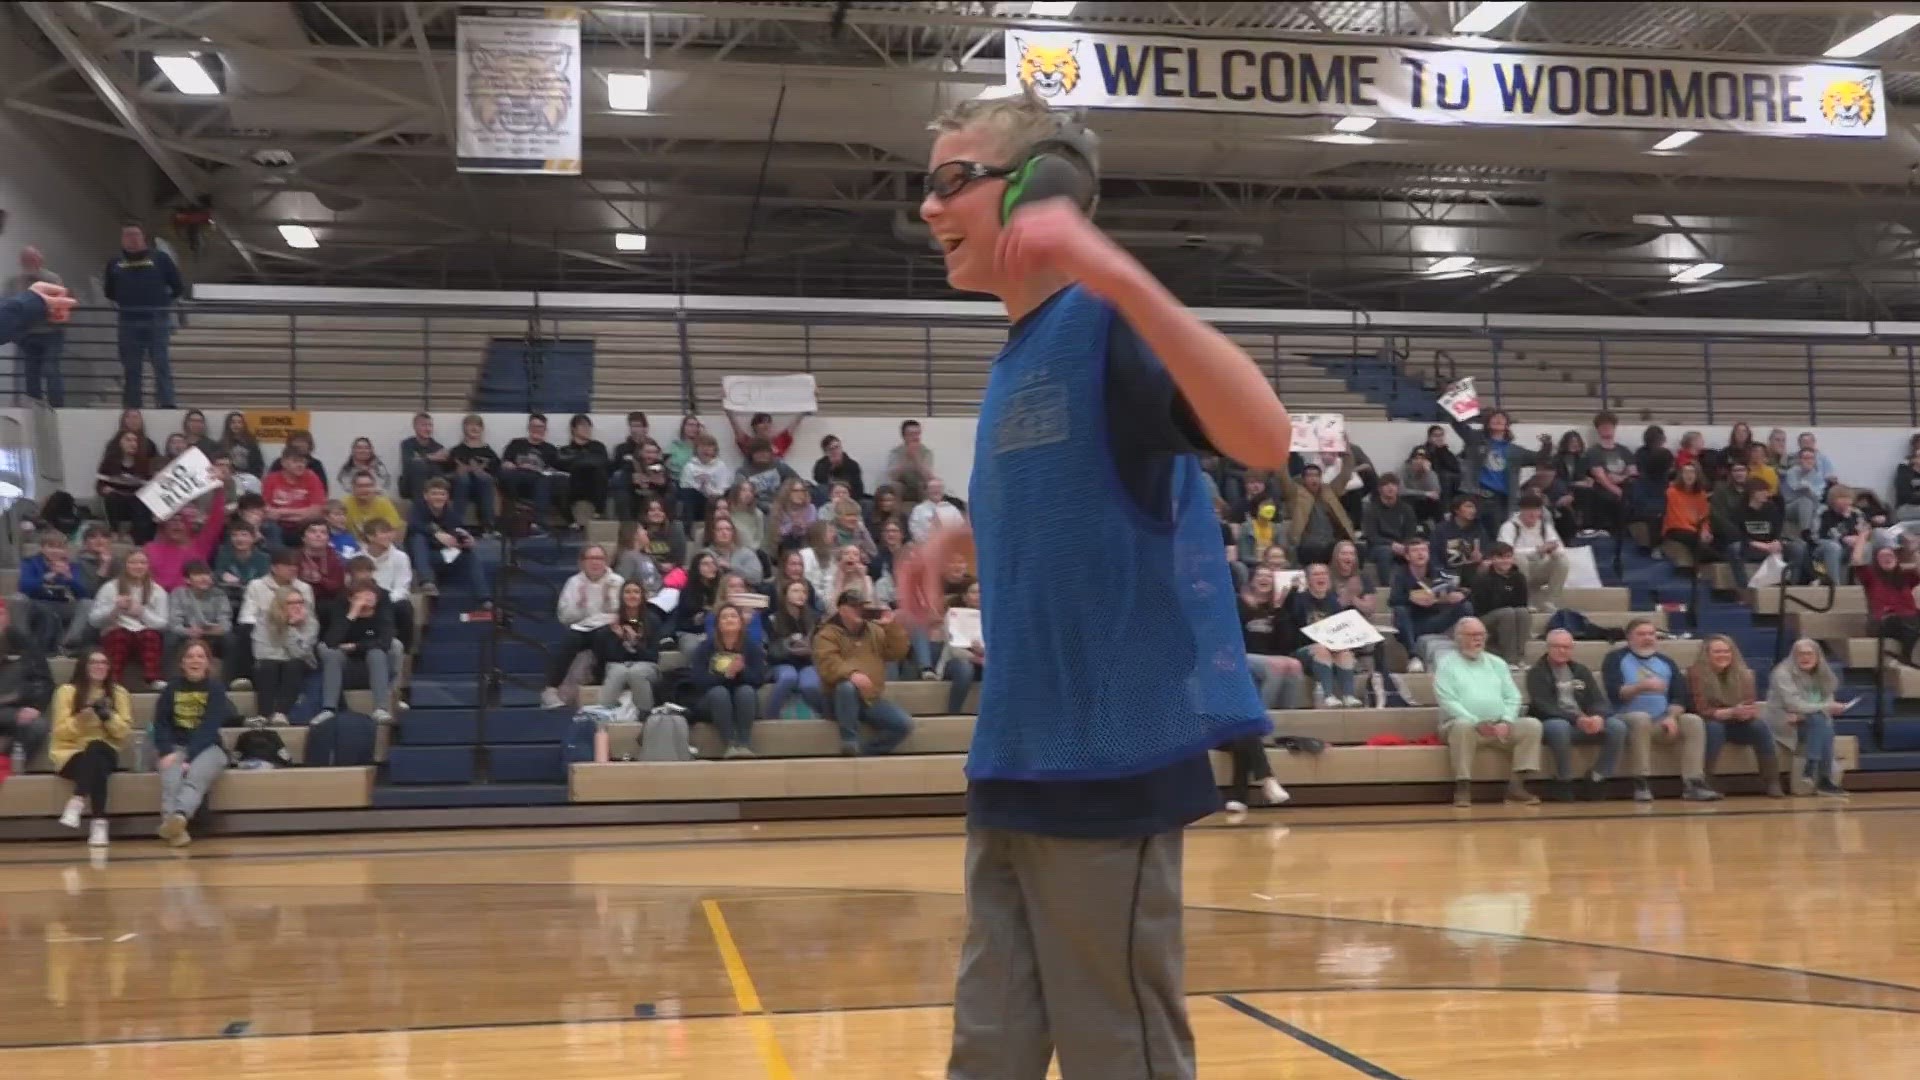 The game capped off Woodmore's Disability Awareness Month spirit week.